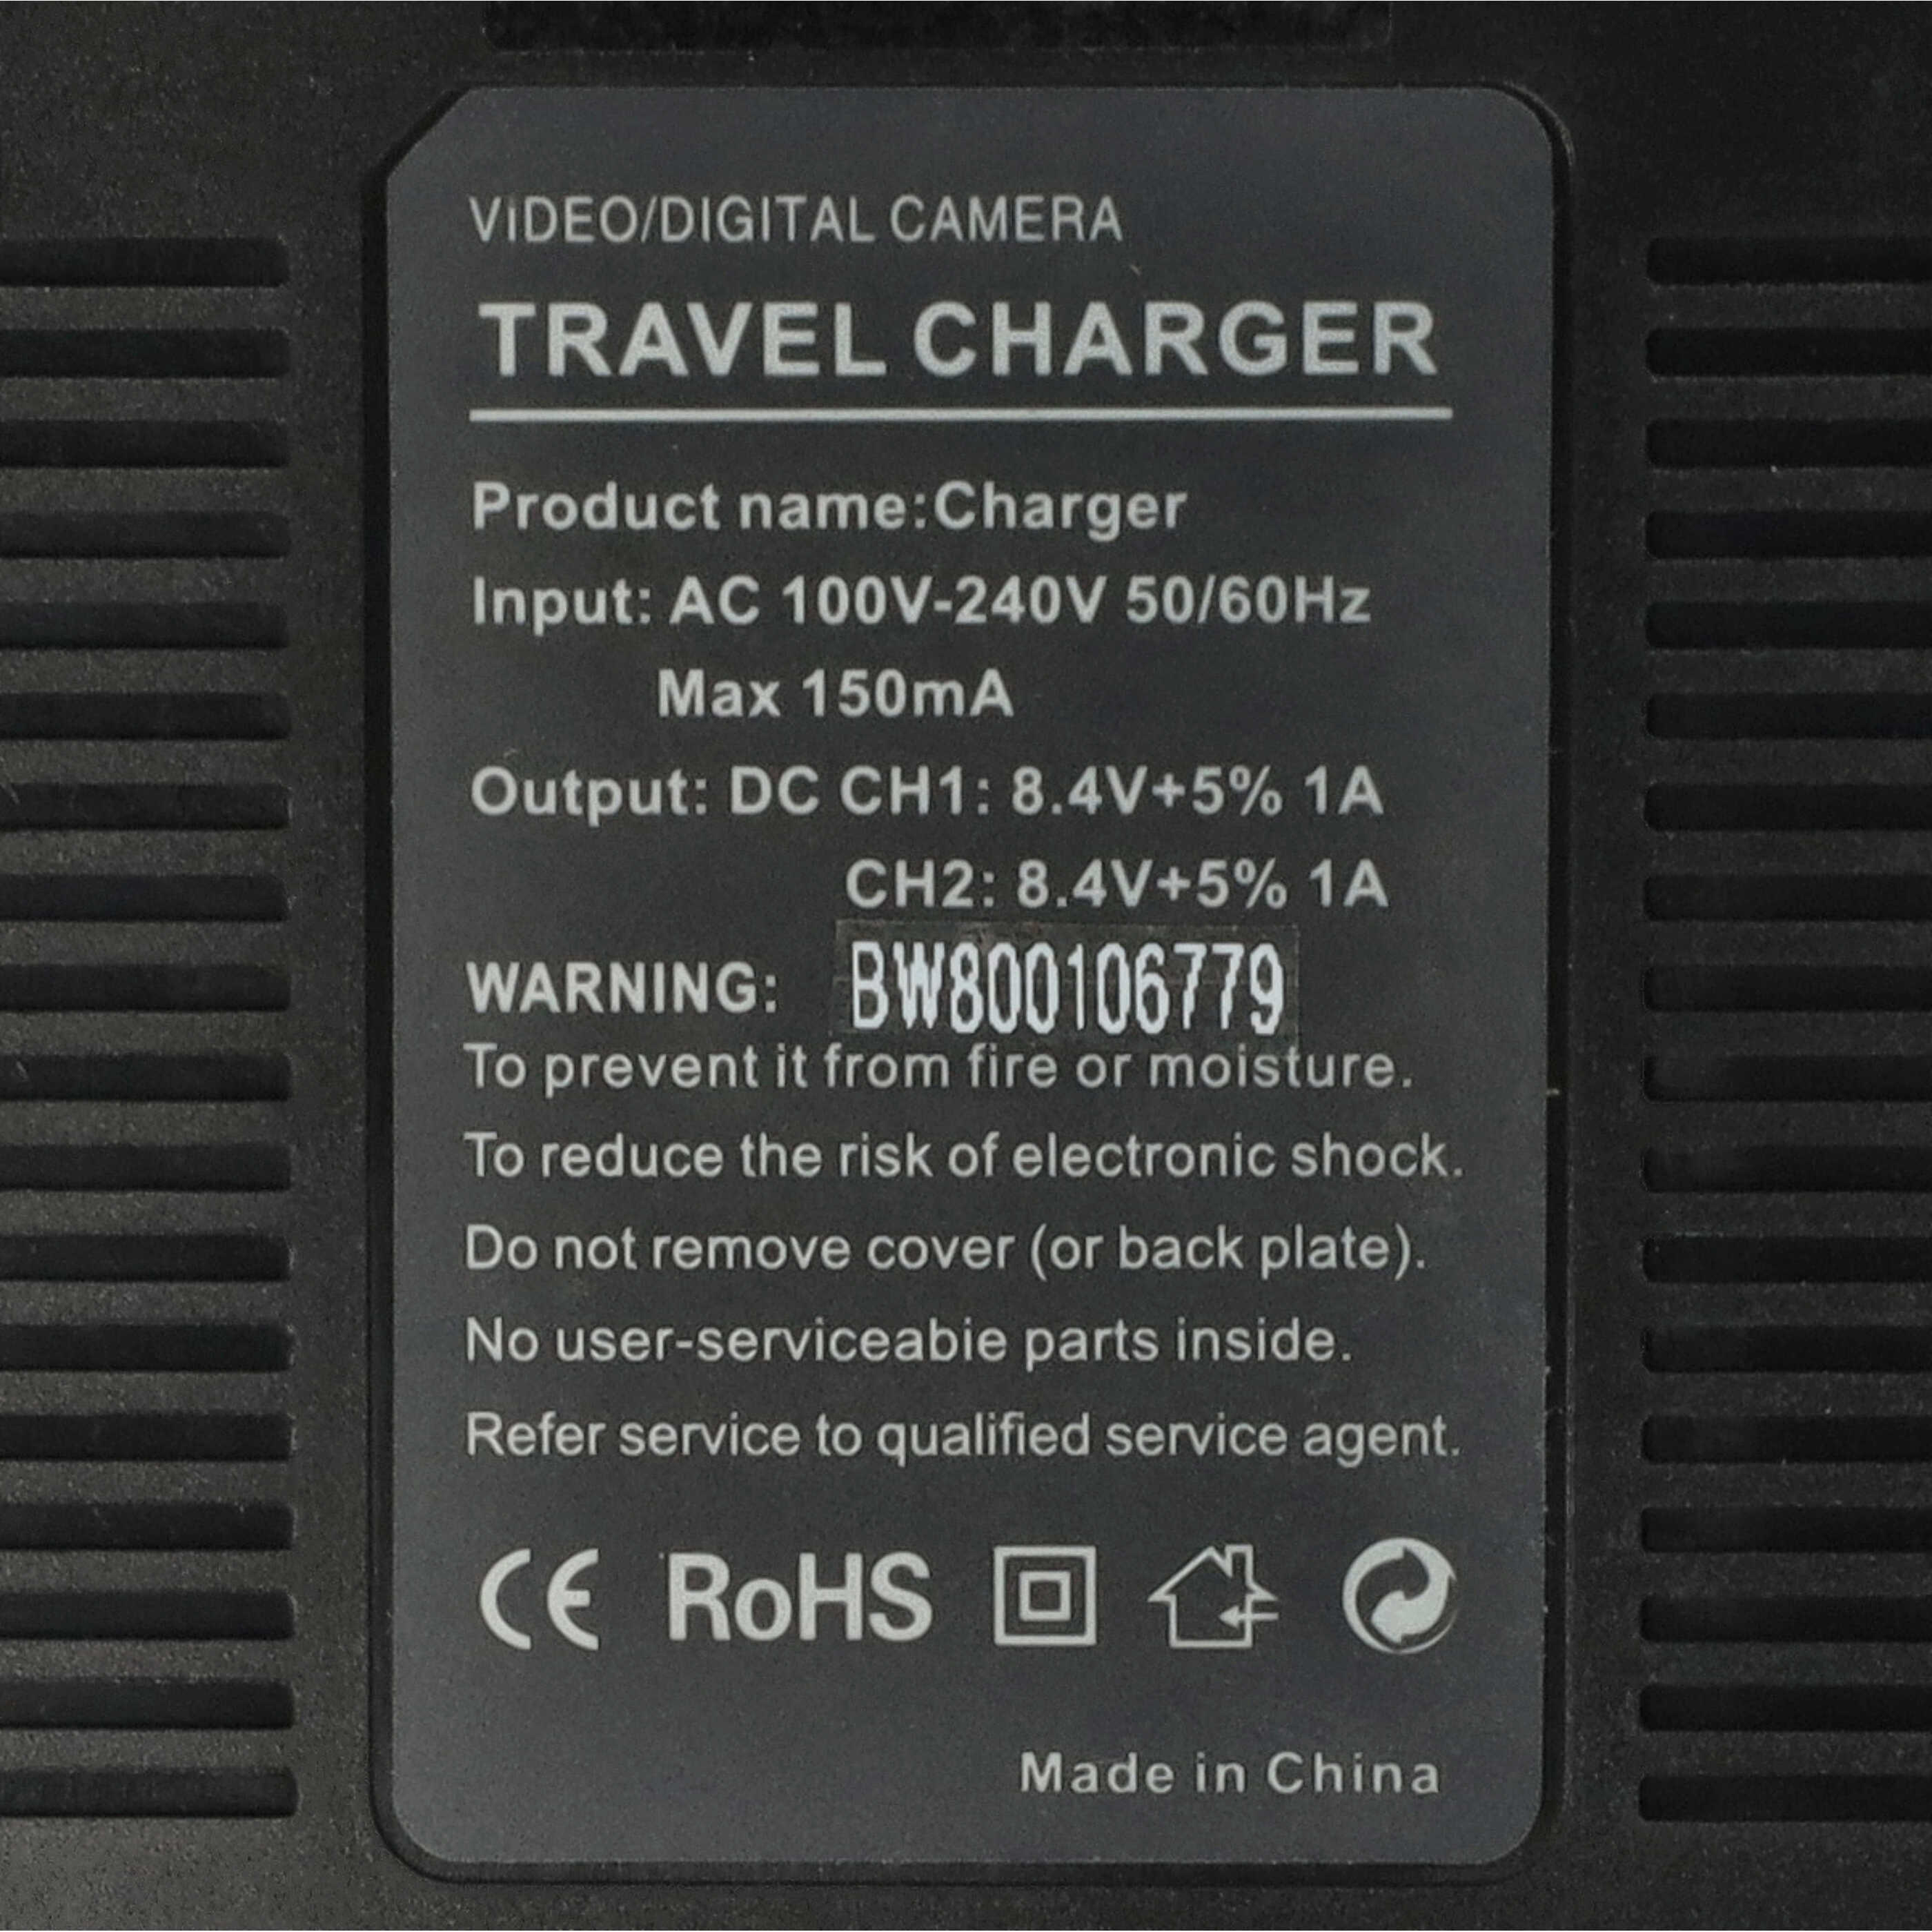 Battery Charger suitable for Coolpix D750 Camera etc. - 0.5 / 0.9 A, 4.2/8.4 V